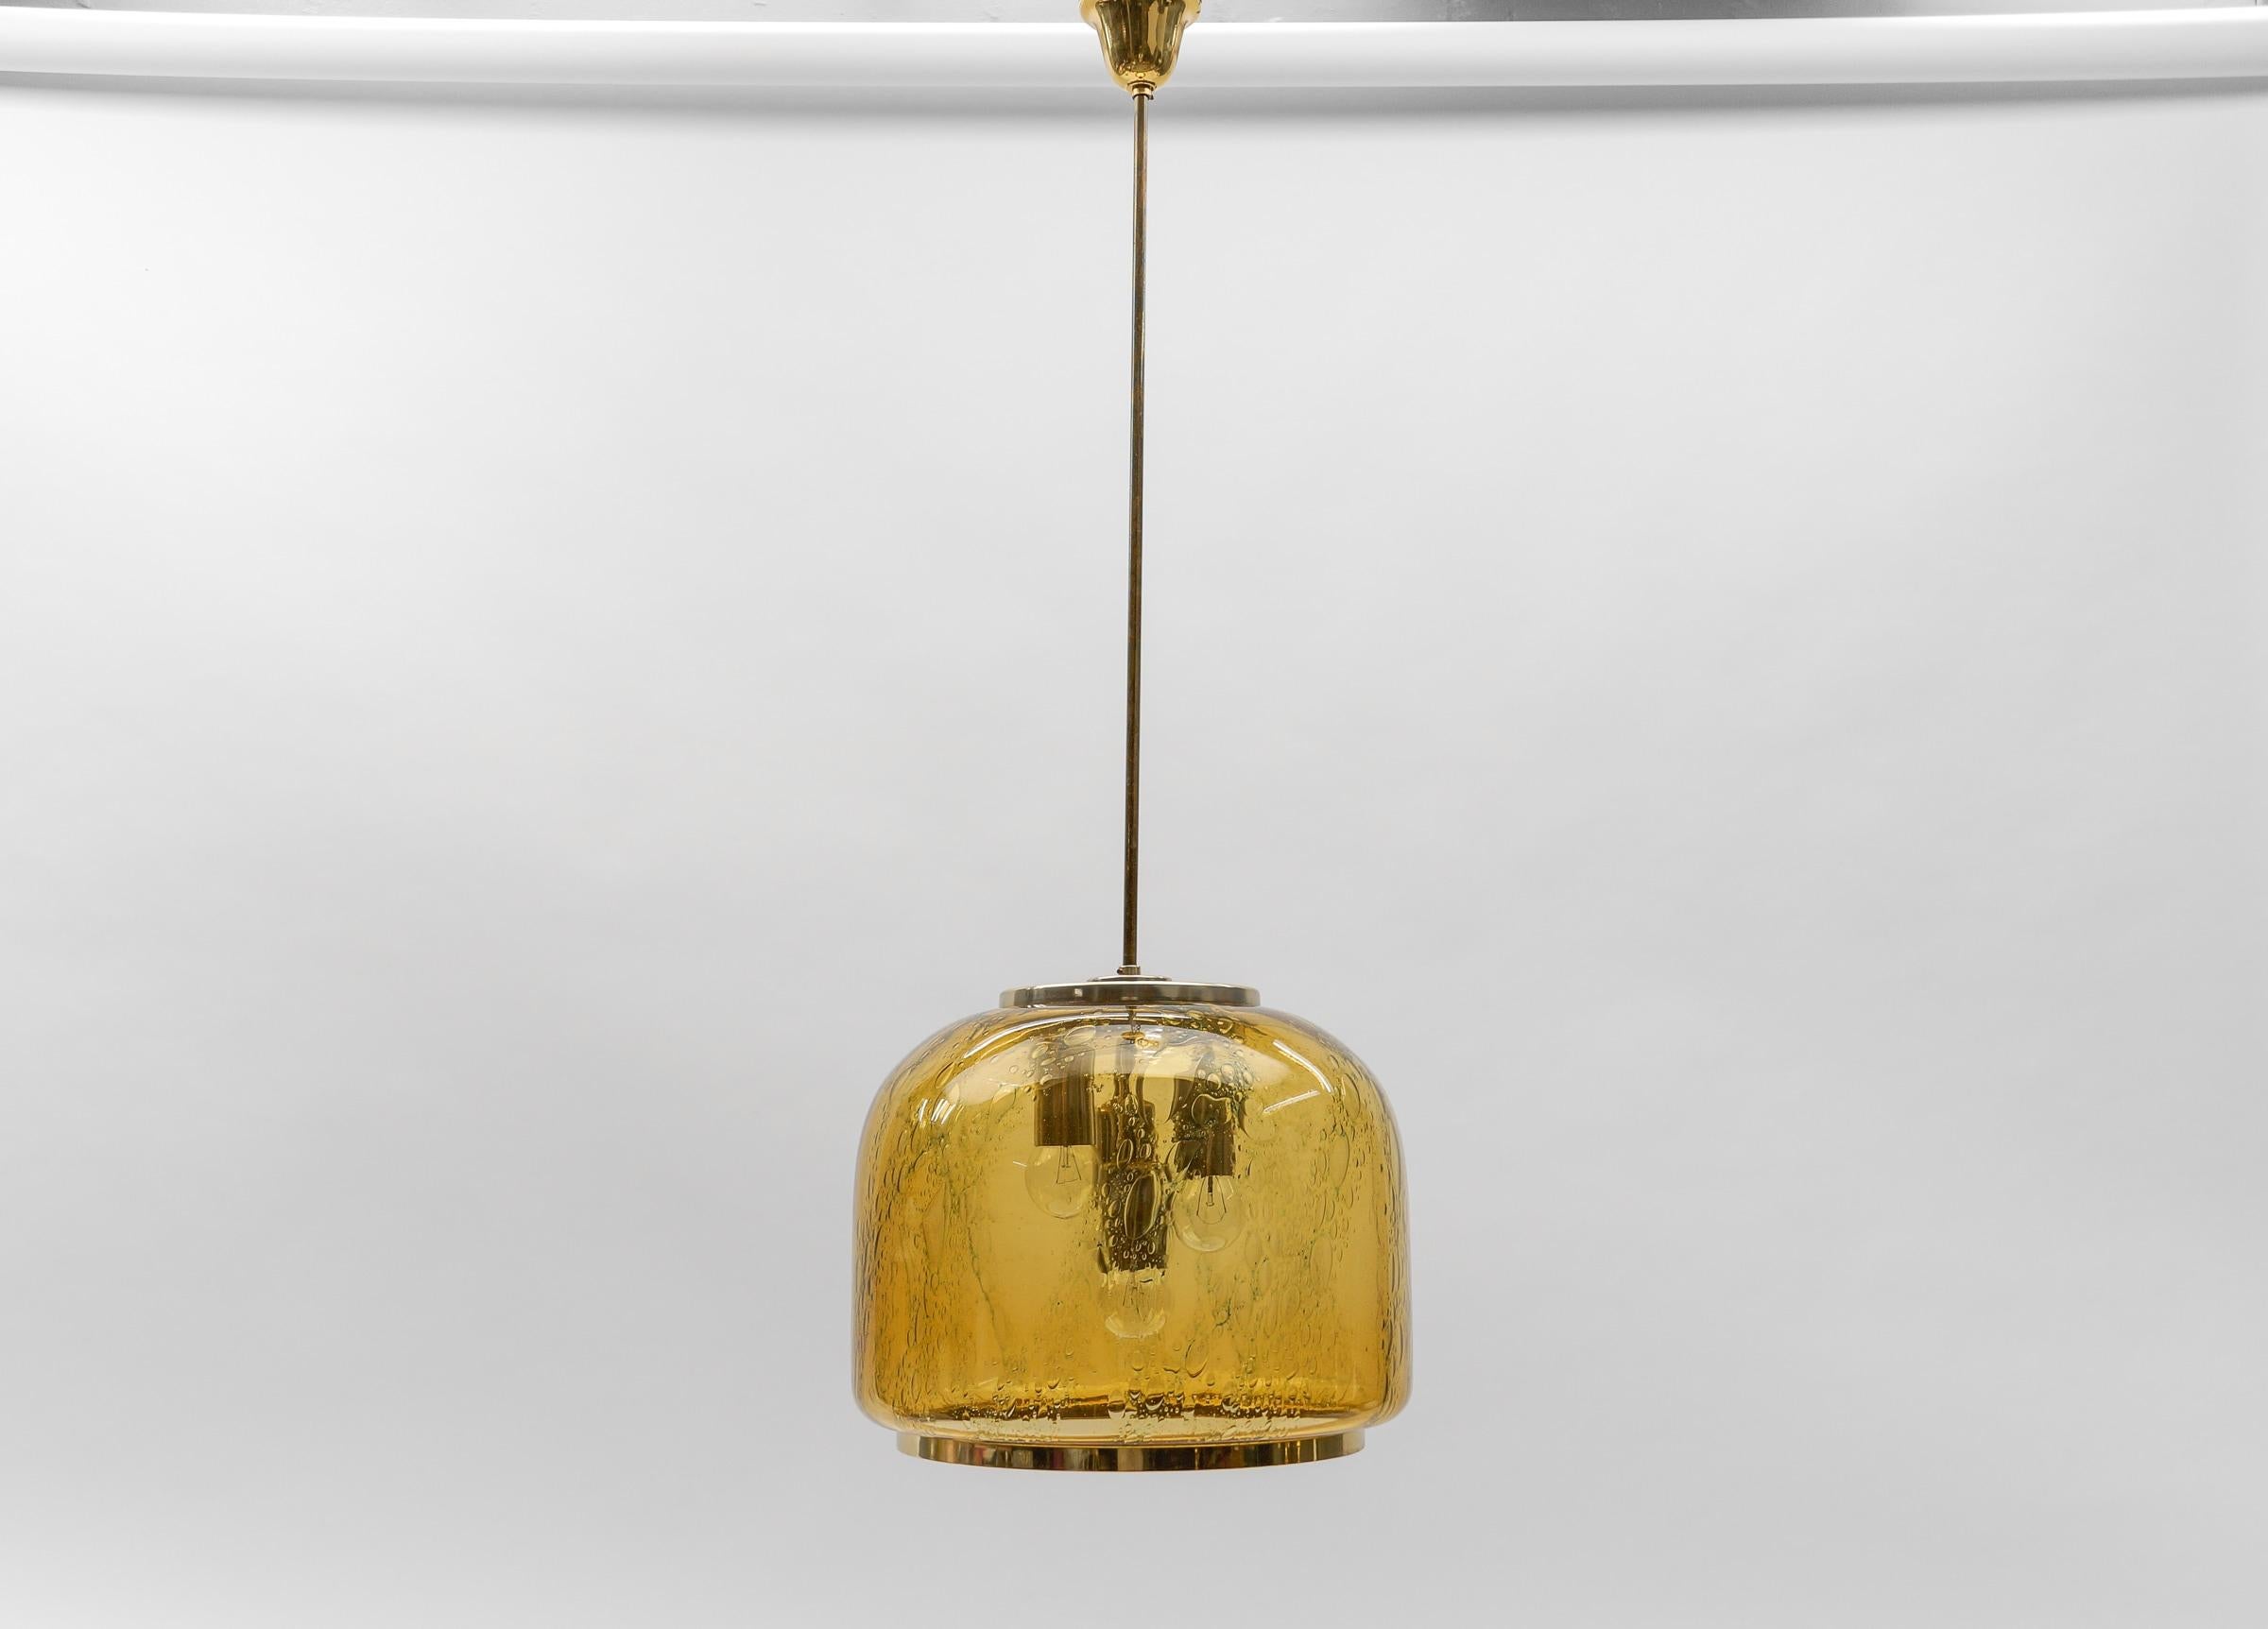 Elegant Smoked Glass Pendant Lamp by Limburg, Mid-Century Modern - Germany

Dimensions
Diameter: 14.96 in. (38 cm)
Height: 41.33 in. (105 cm)

One E27 socket. Works with 220V and 110V.

Our lamps are checked, cleaned and are suitable for use in the